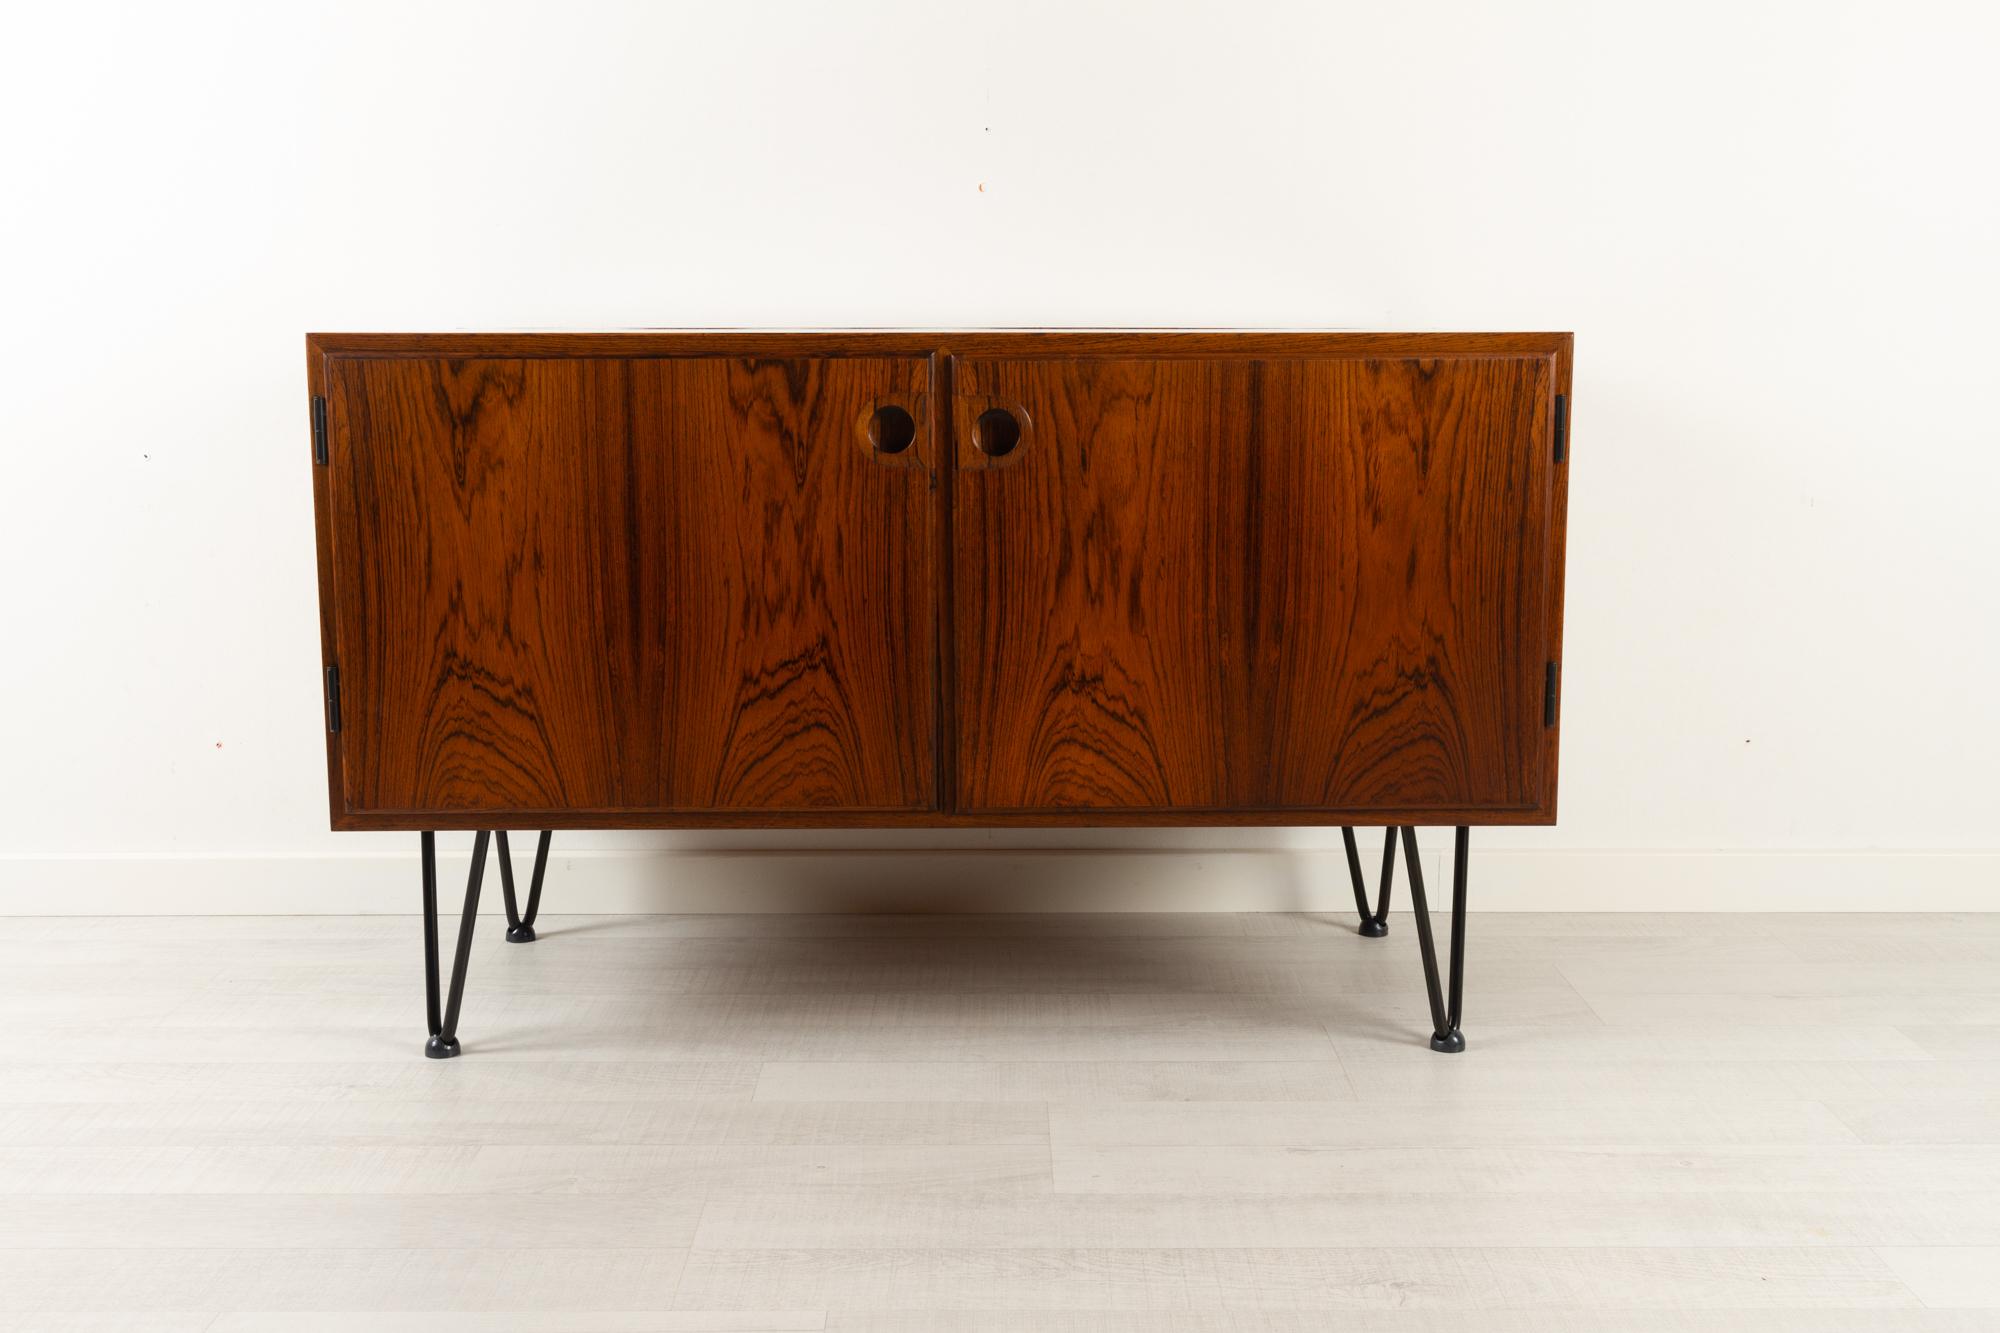 Vintage Danish rosewood cabinet 1960s
Mid-Century Modern small sideboard in Rosewood made in Denmark. Two compartments with hinged doors. Inside with two height adjustable shelves. Very vivid and expressive Rosewood grain. Sculpted handles in solid